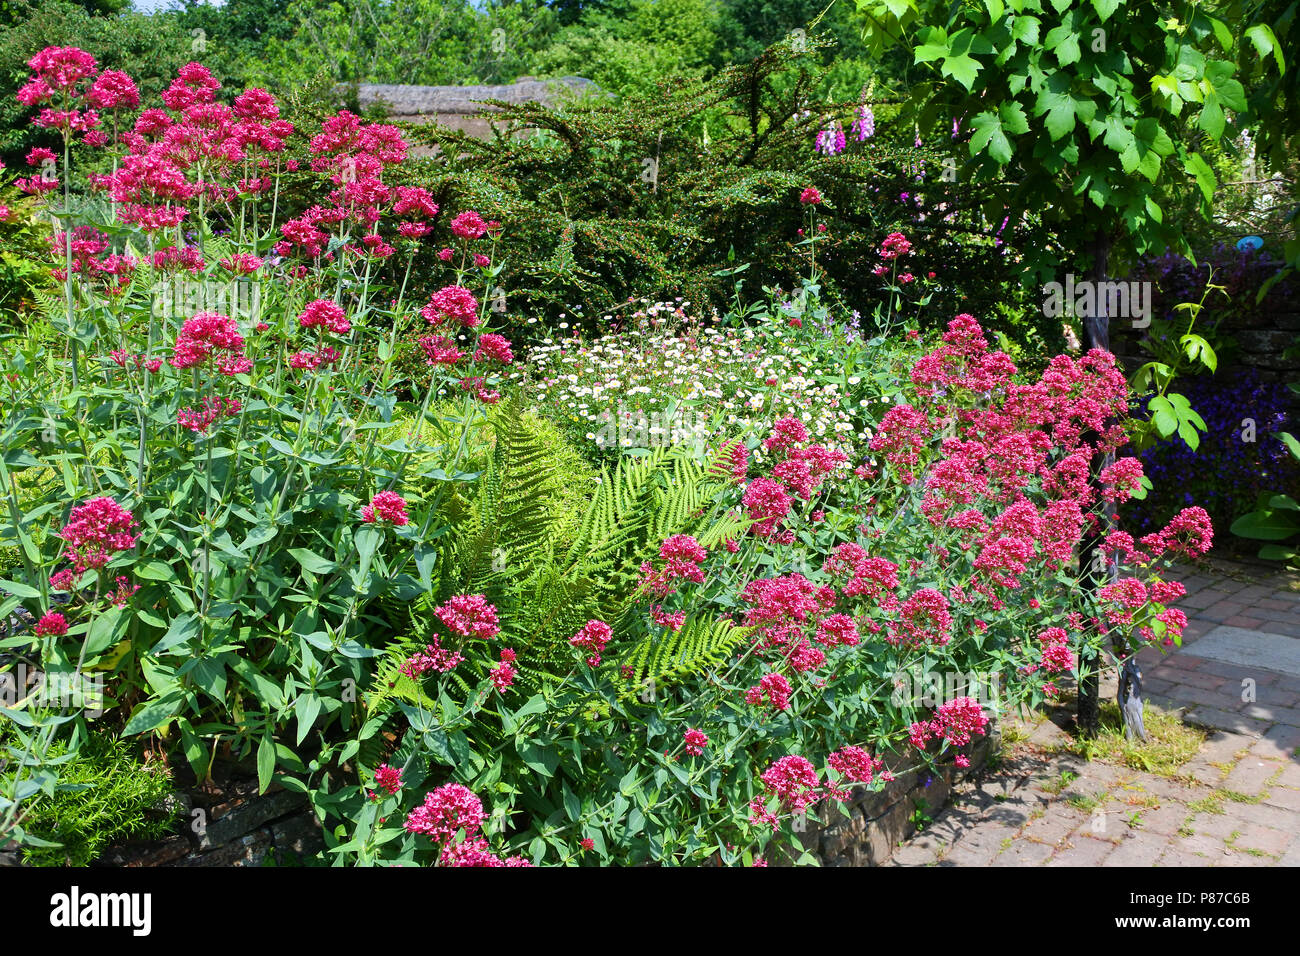 Flowering Valerian in a tradition English cottage garden - John Gollop Stock Photo